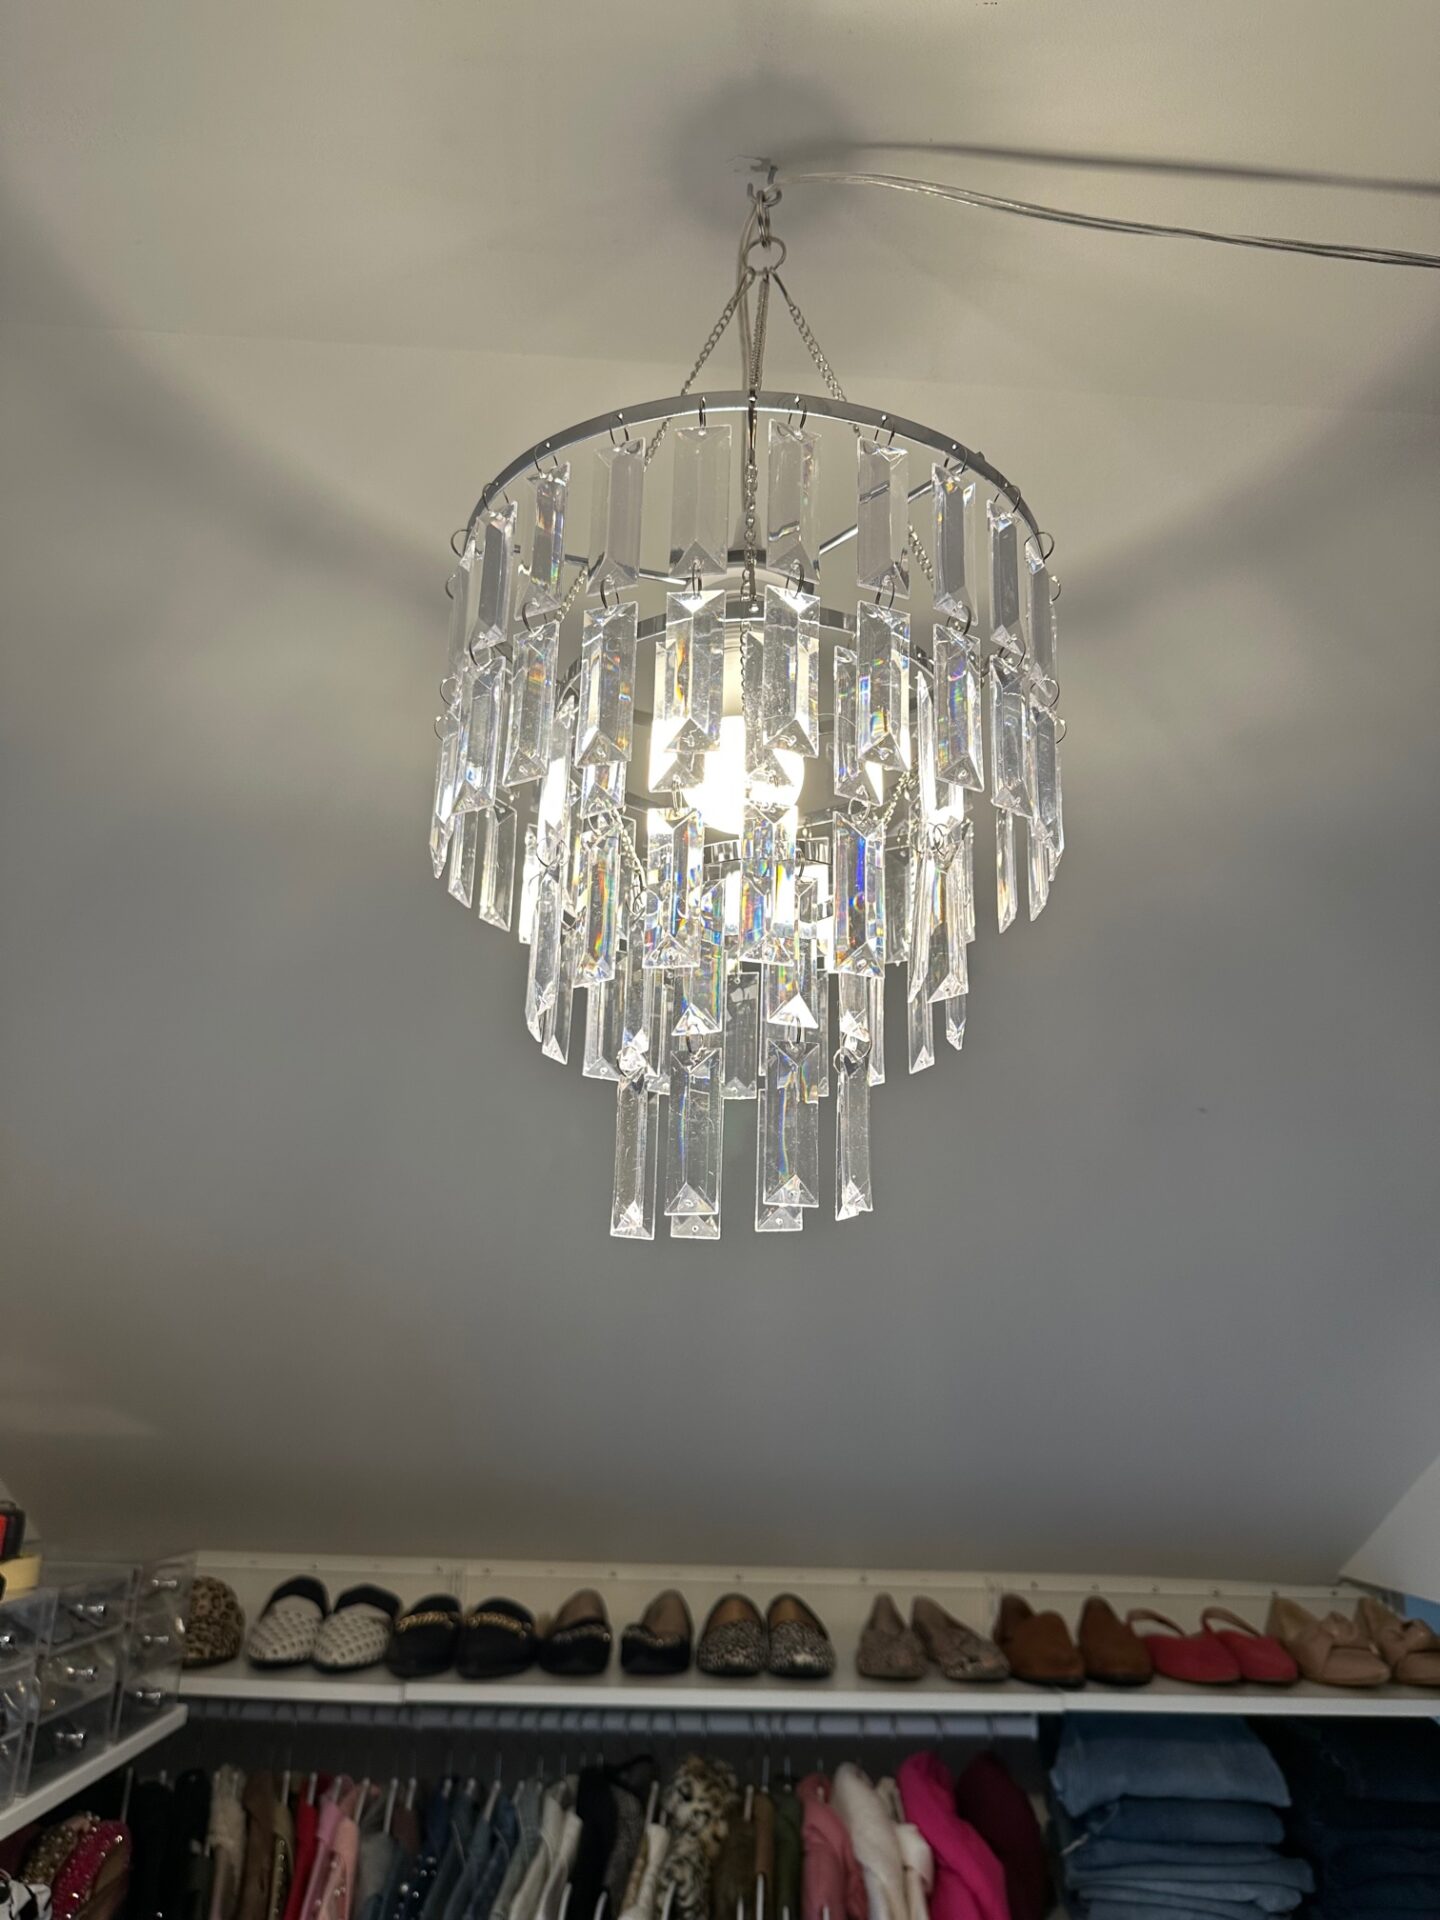 AMAZON PLUG IN CHANDELIER - An incredible before-and-after closet transformation and master closet organization project with luxury Philadelphia professional organizers, The Organized Home Co.